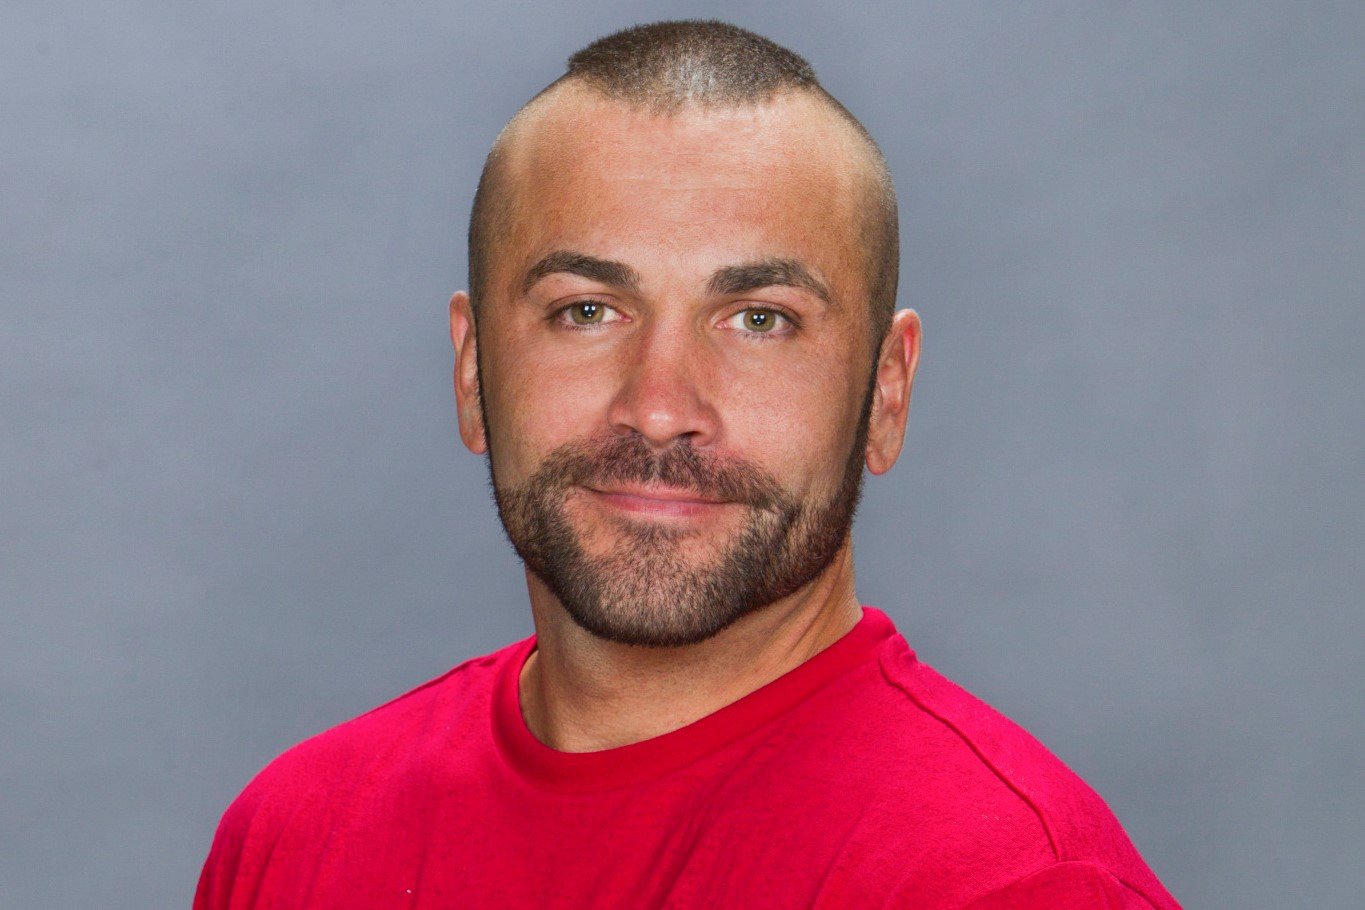 Willie Hantz, who starred in 'Big Brother 14' on CBS, wears a red shirt.